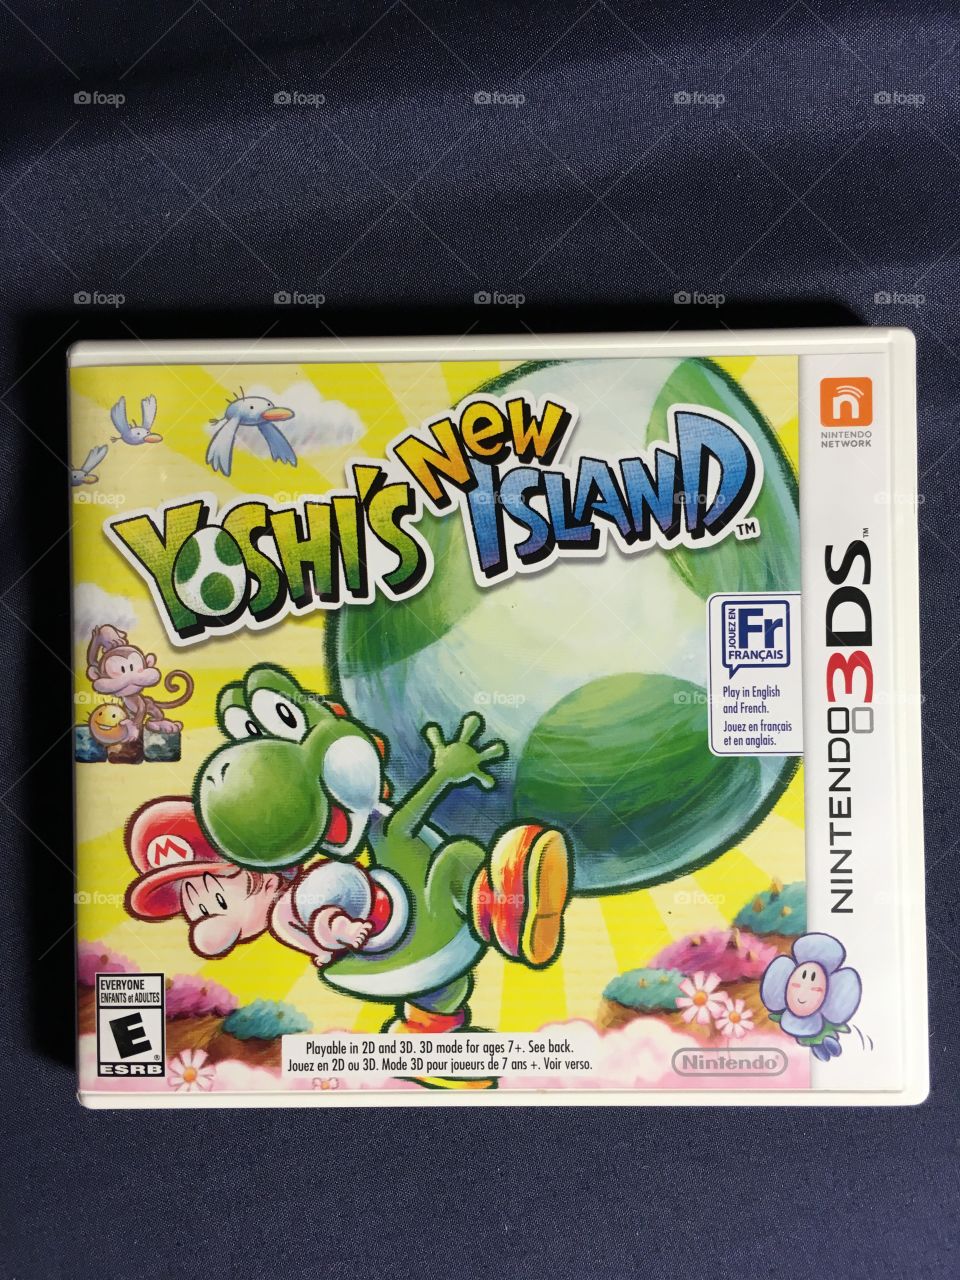  New Yoshi's Island video game for the Nintendo 3ds - released 2014